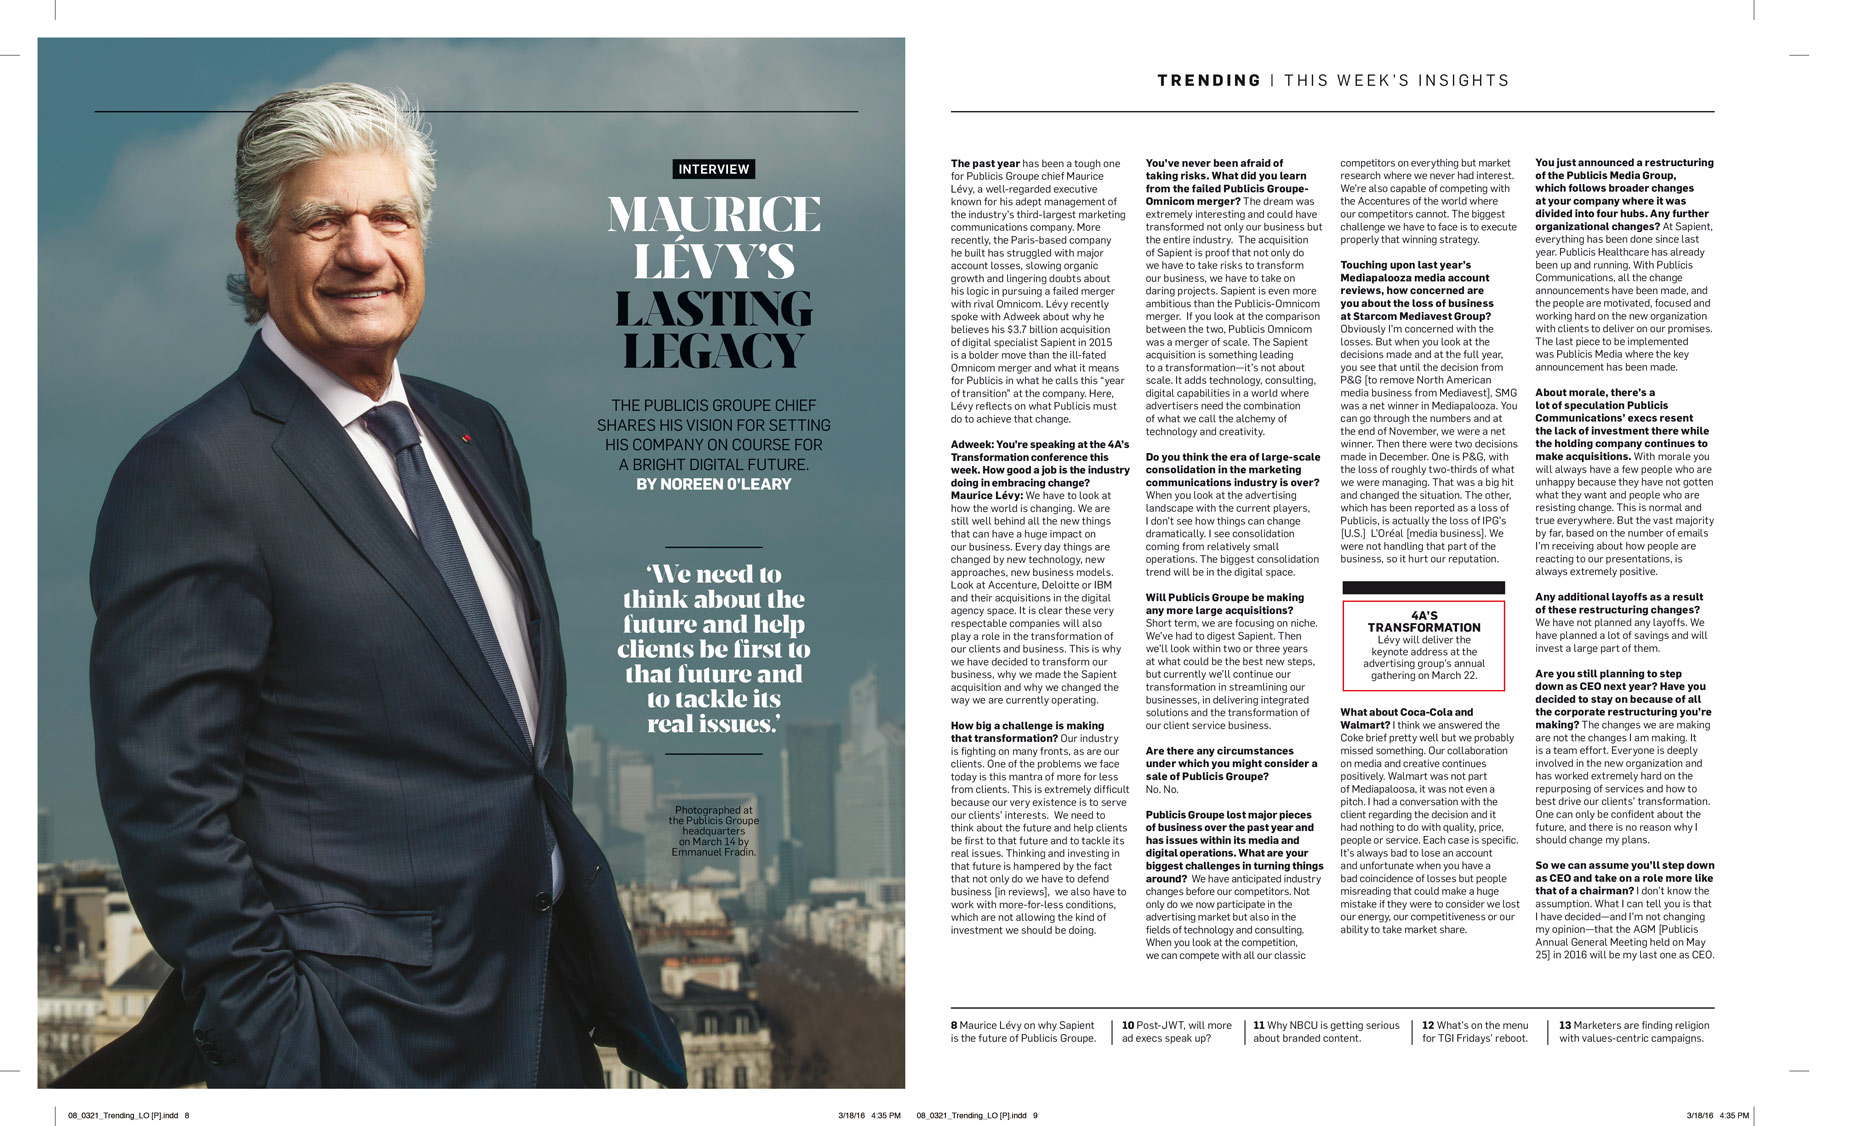 Maurice Levy - Adweek 